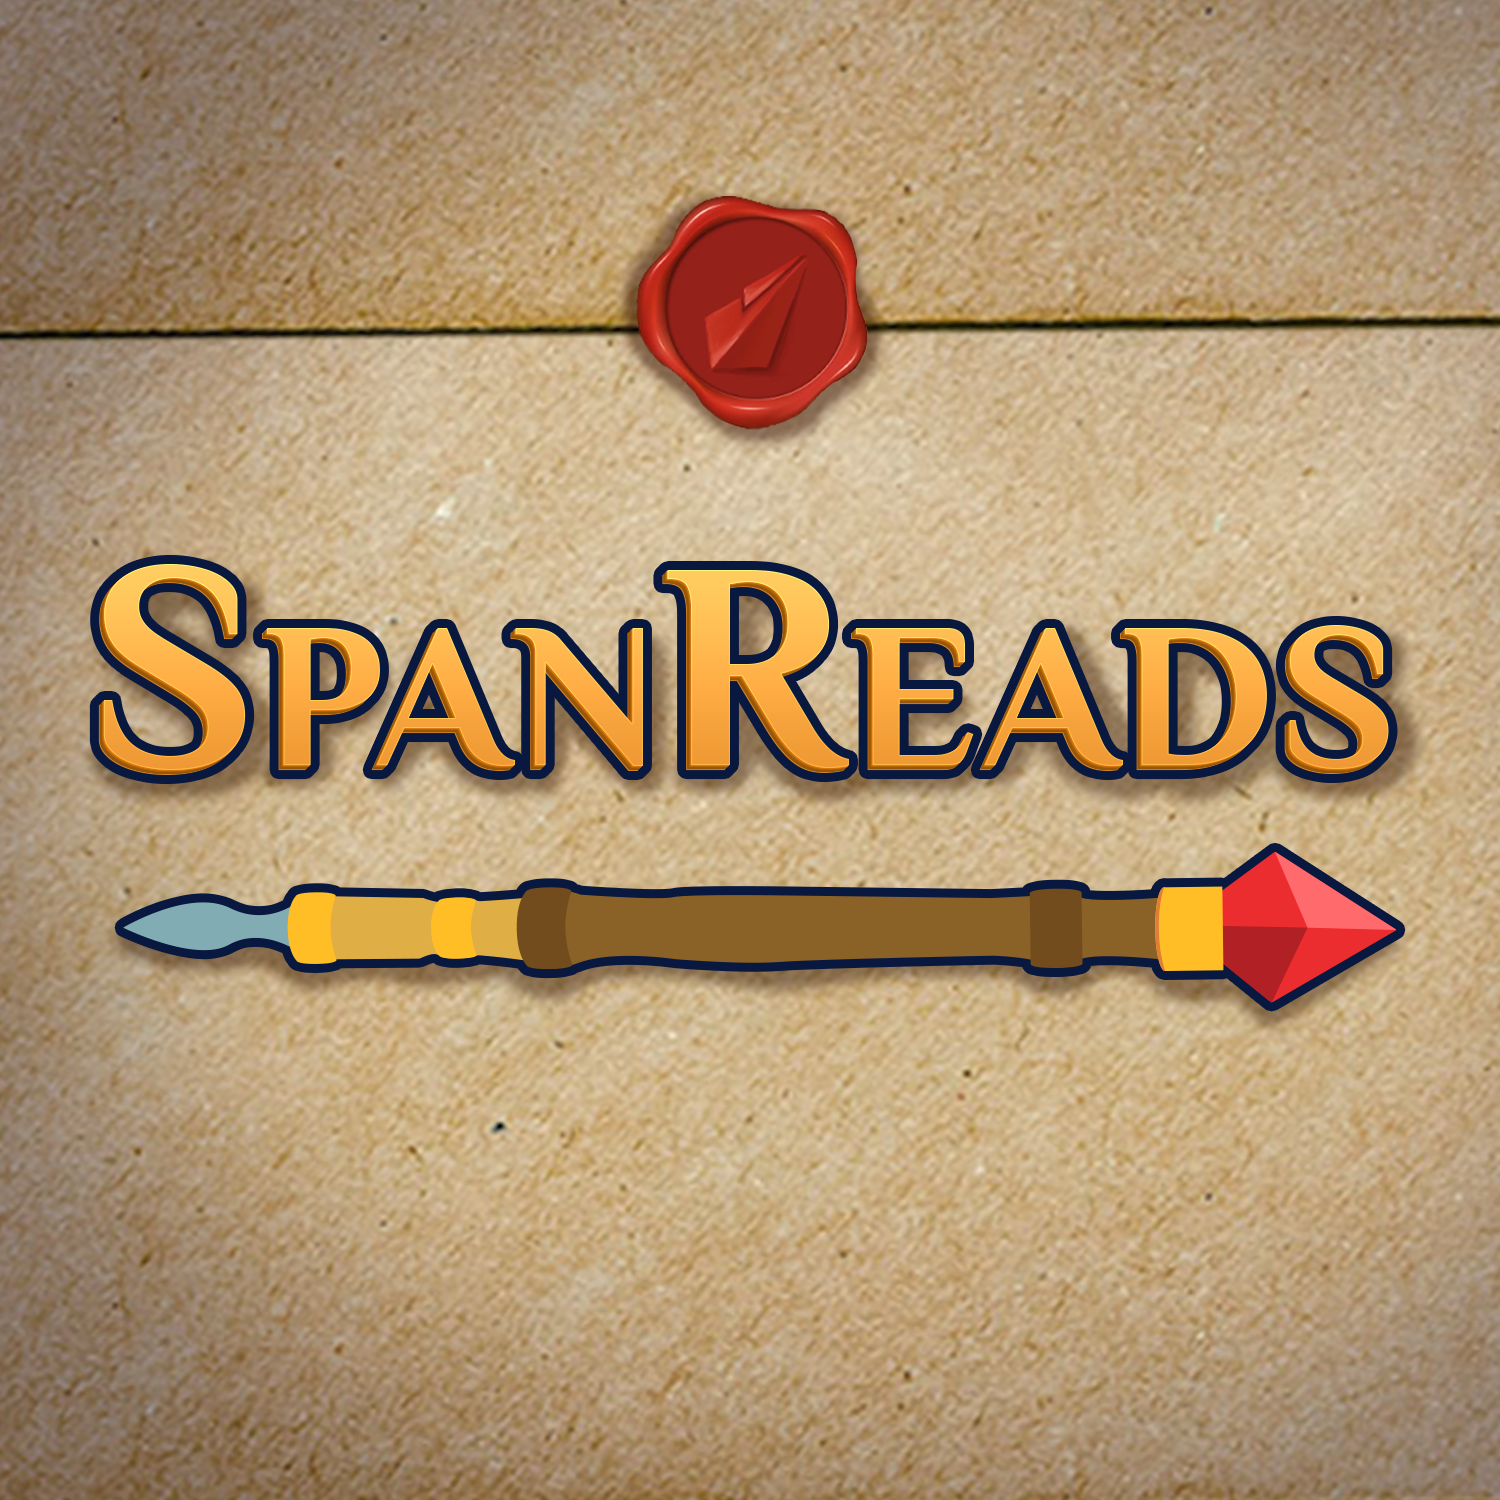 More information about "SpanReads: Starsight - Lore"